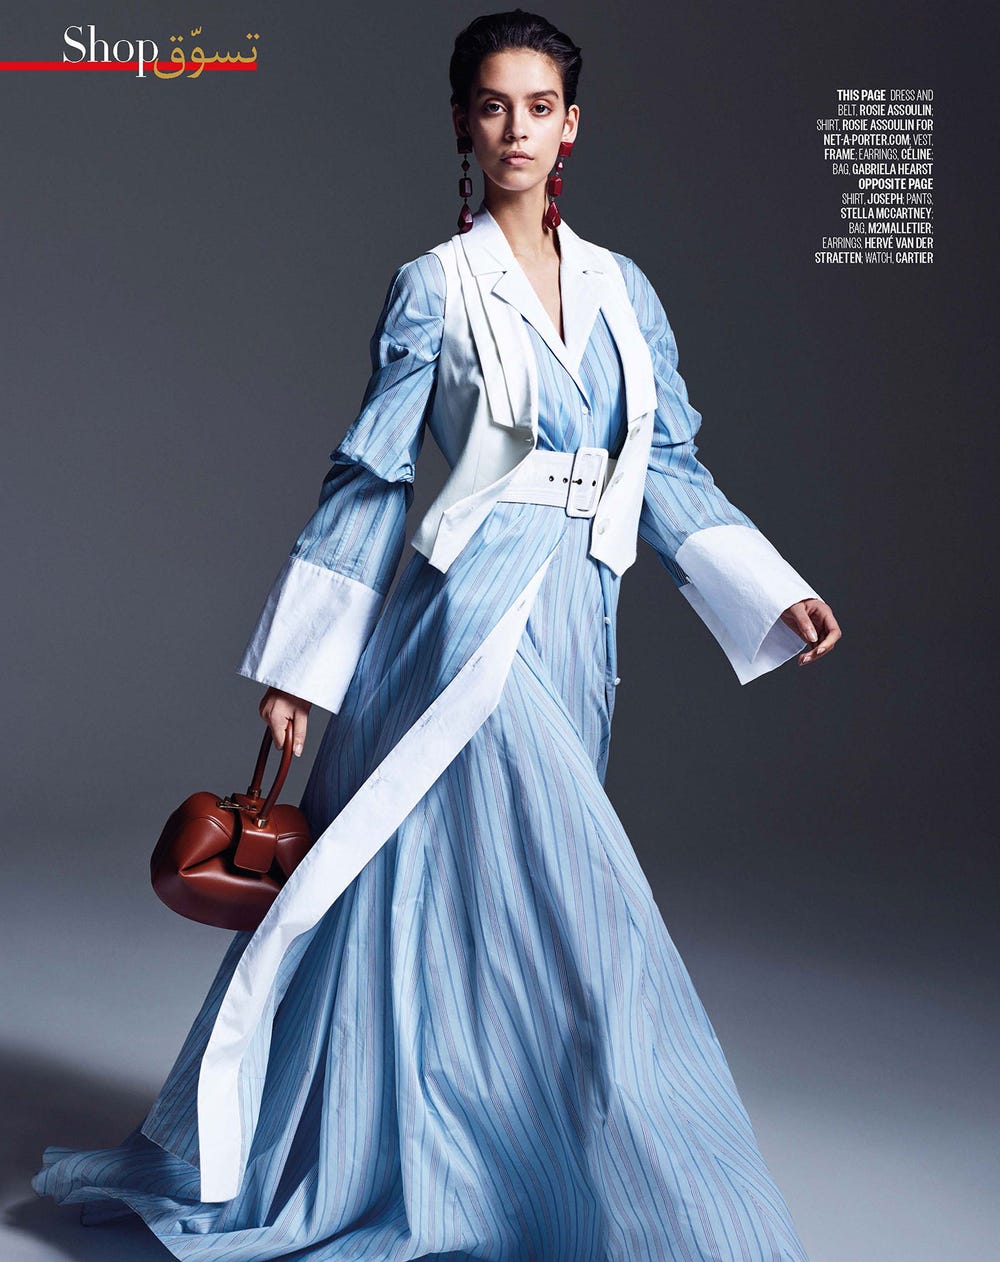 cover of Vogue Arabia: model wears a dress designed like a men's shirt, with a belt, vest, earrings, and bag